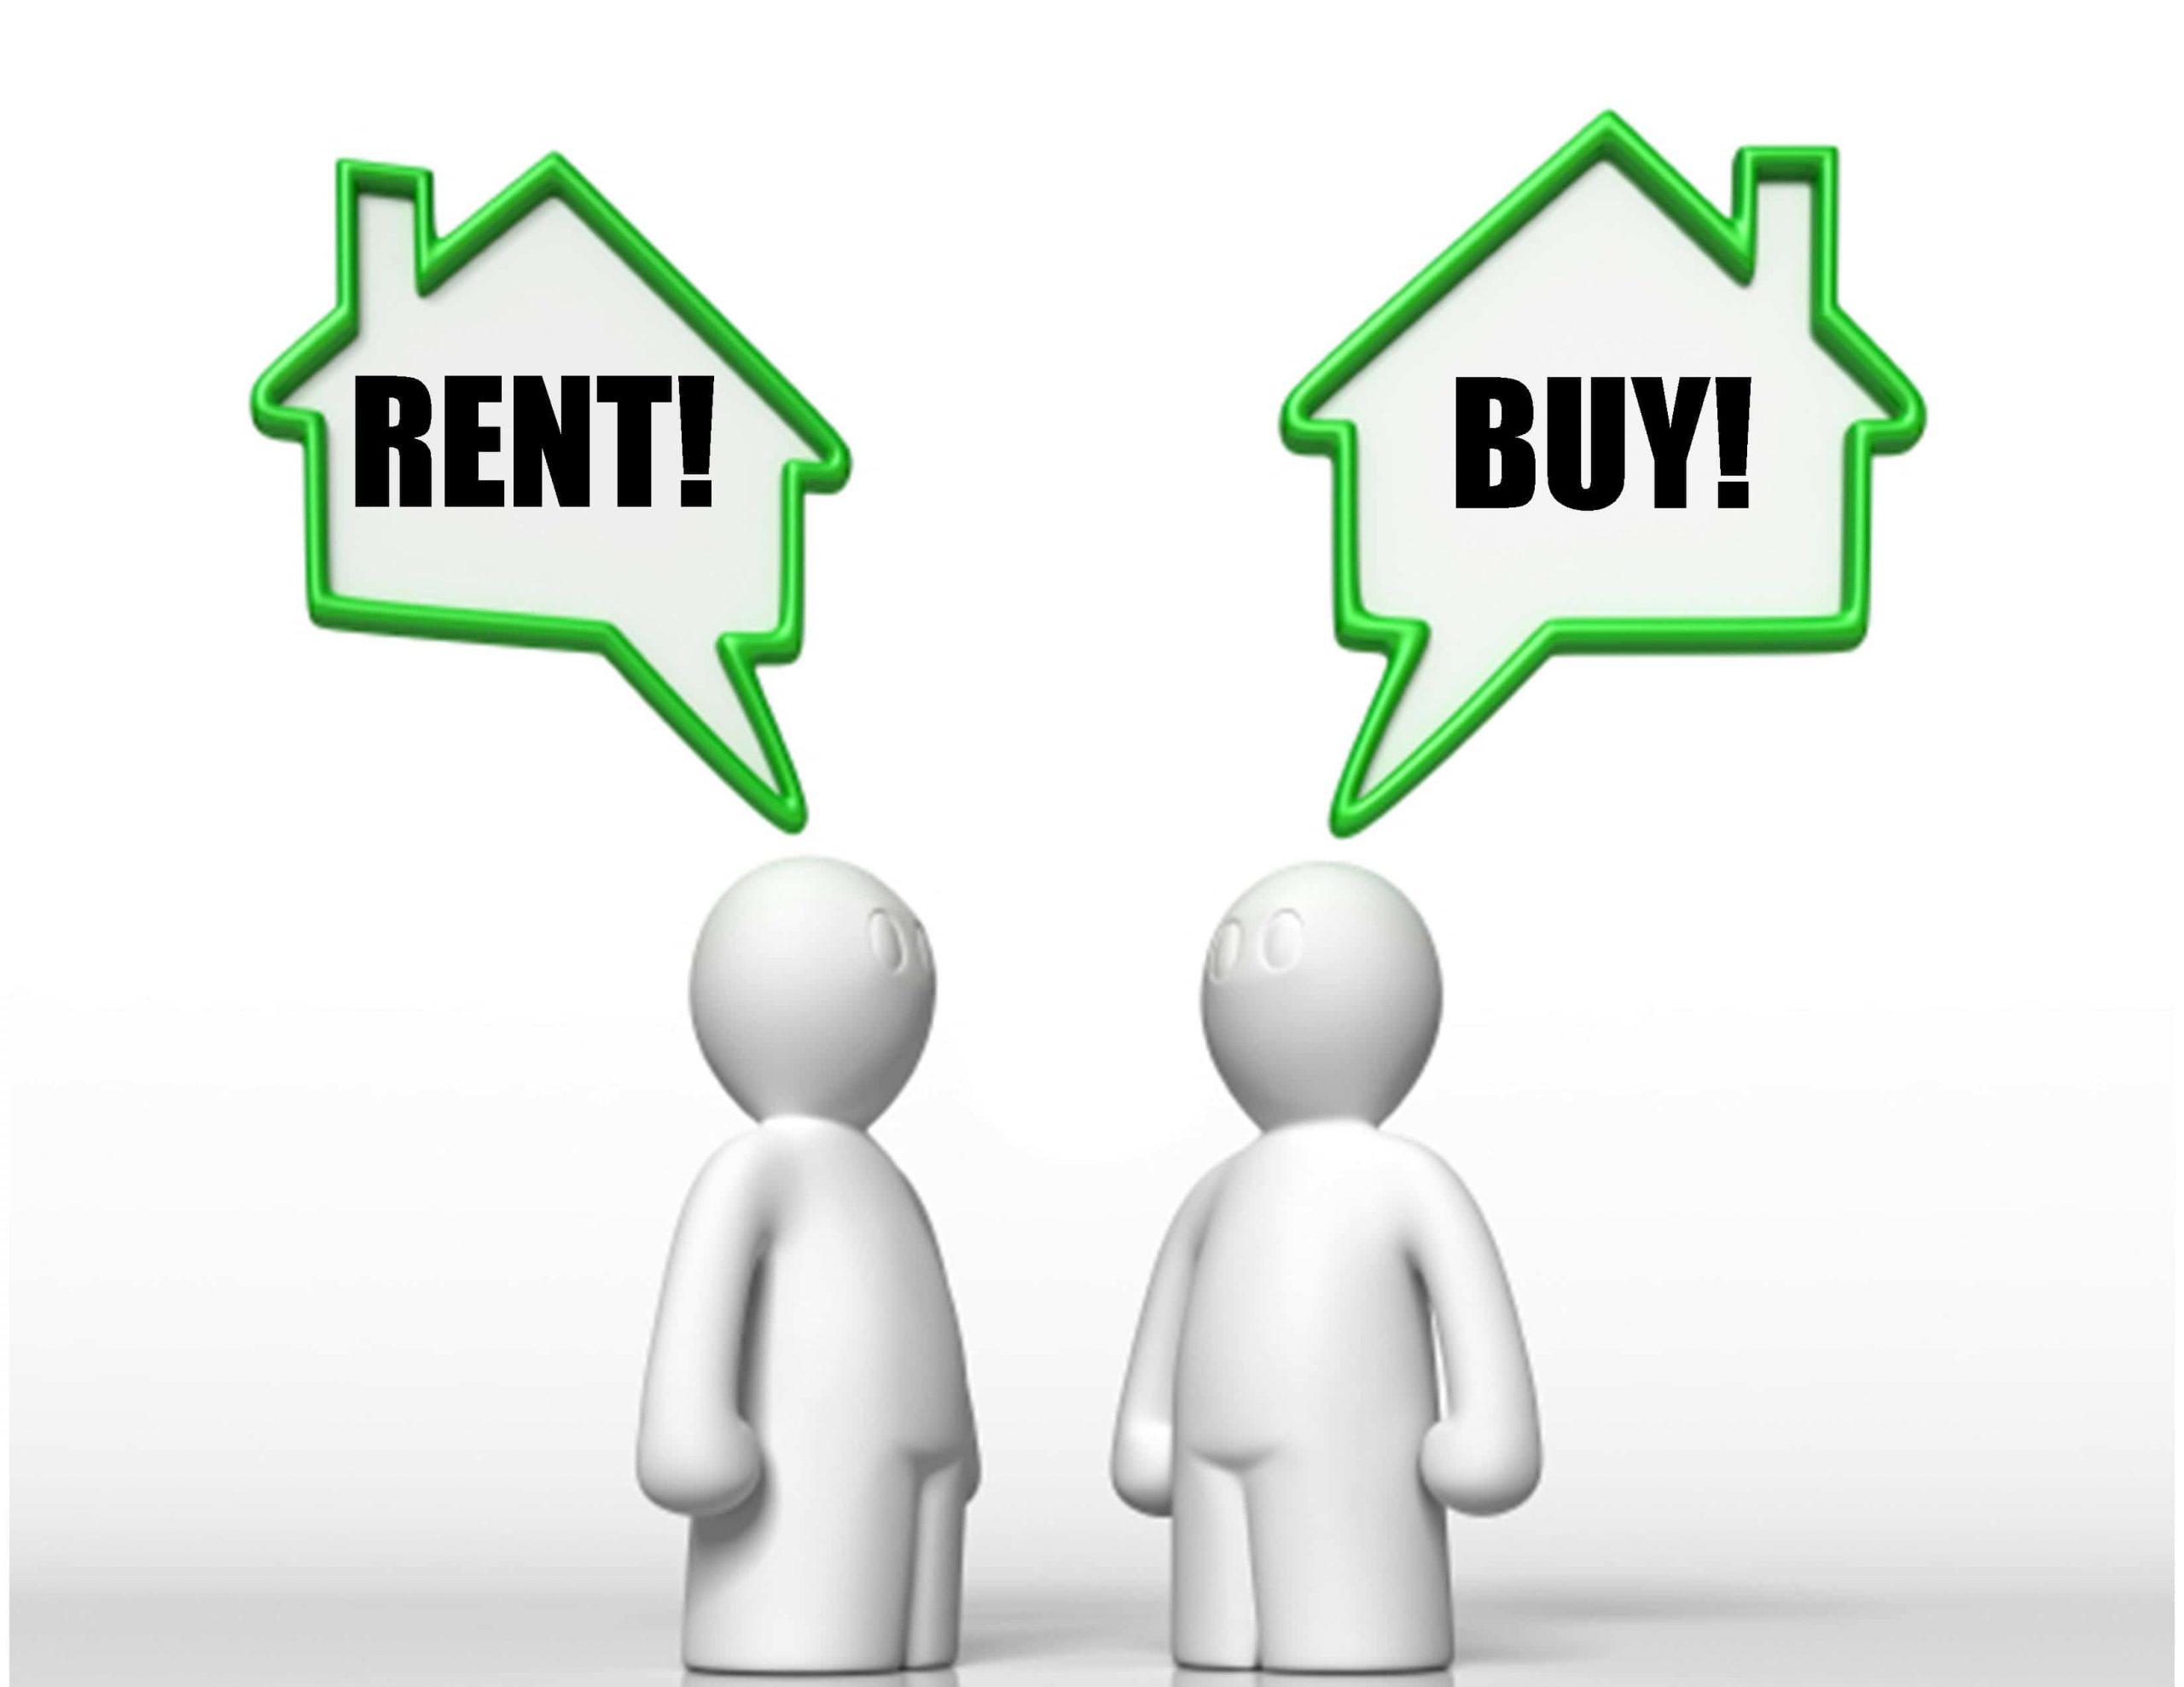 What Shall I do: Rent or Buy